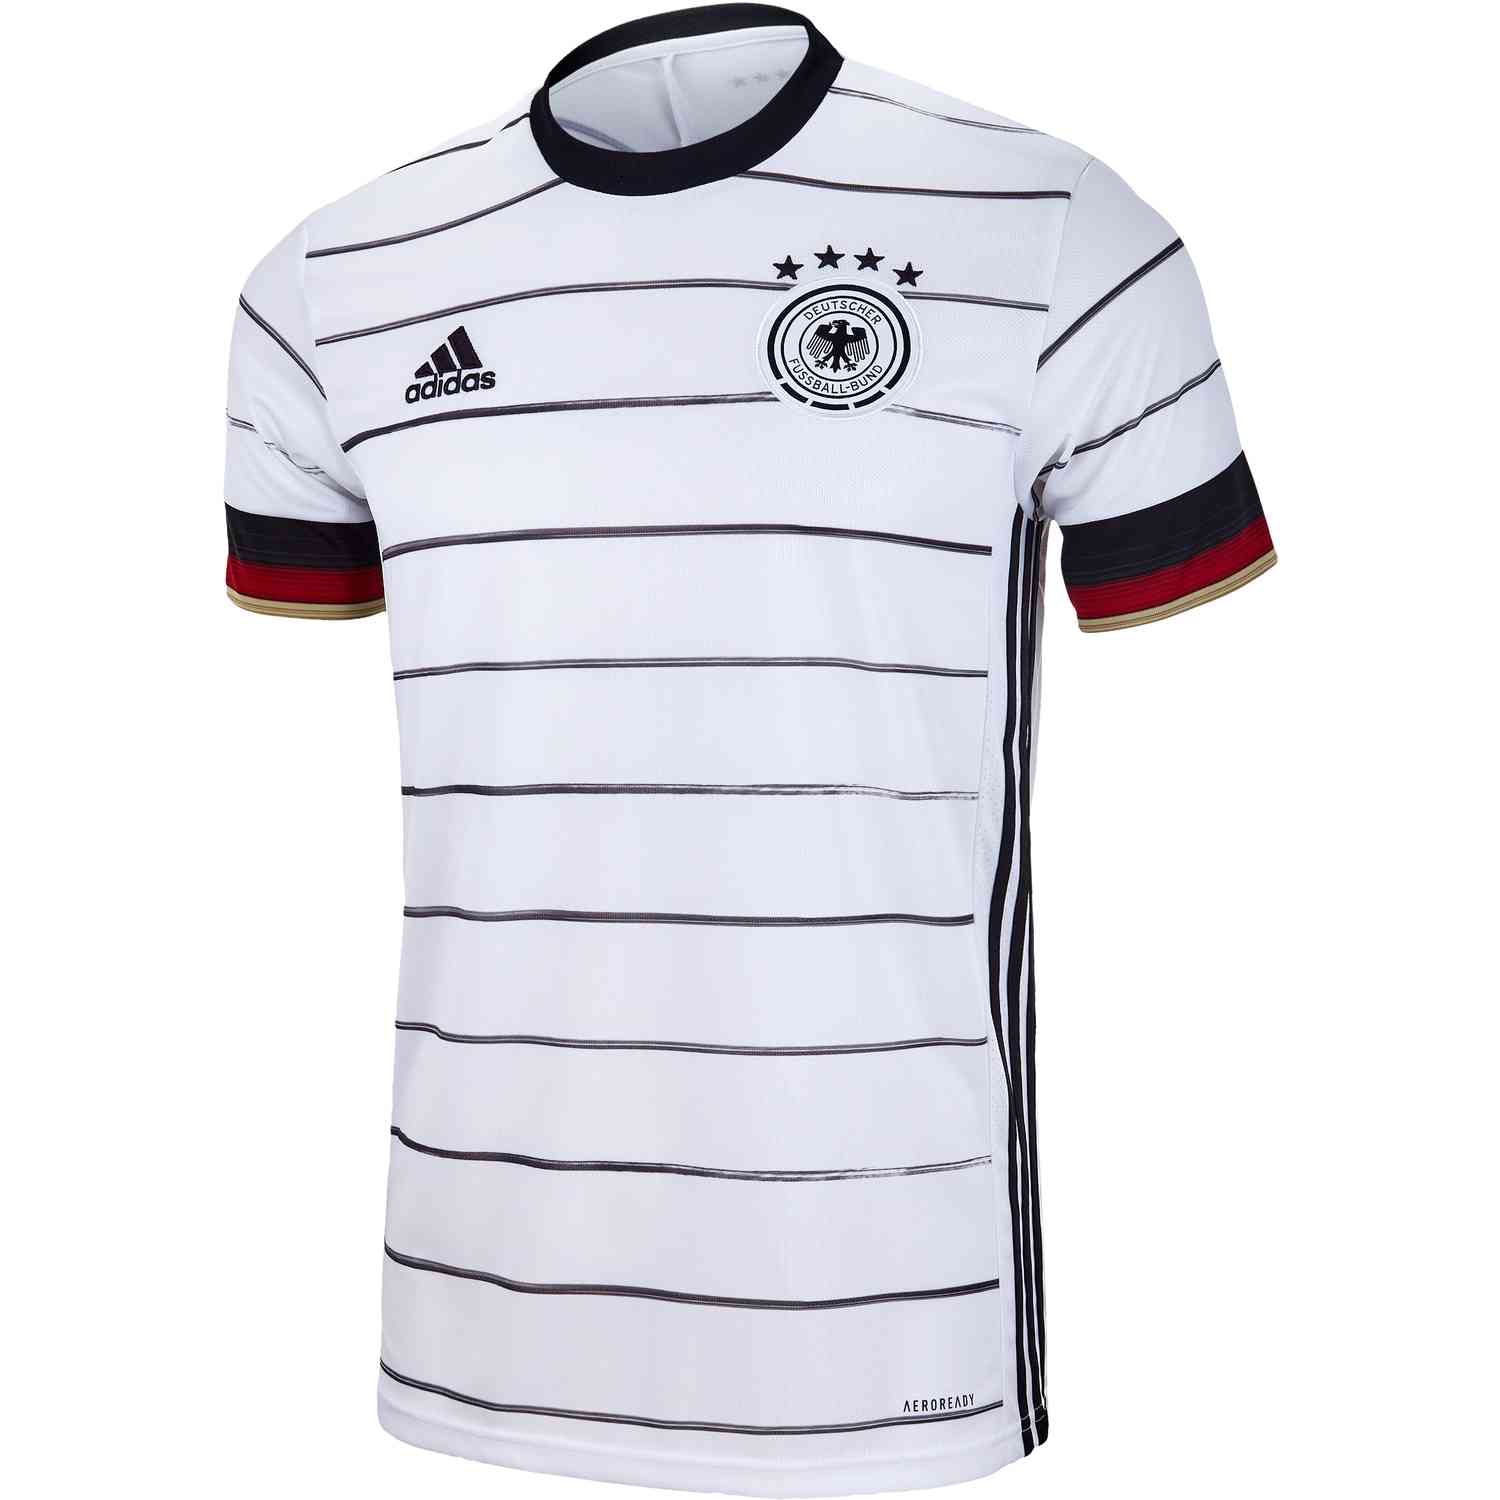 Germany national team Home soccer jersey 2020/21 - Adidas –